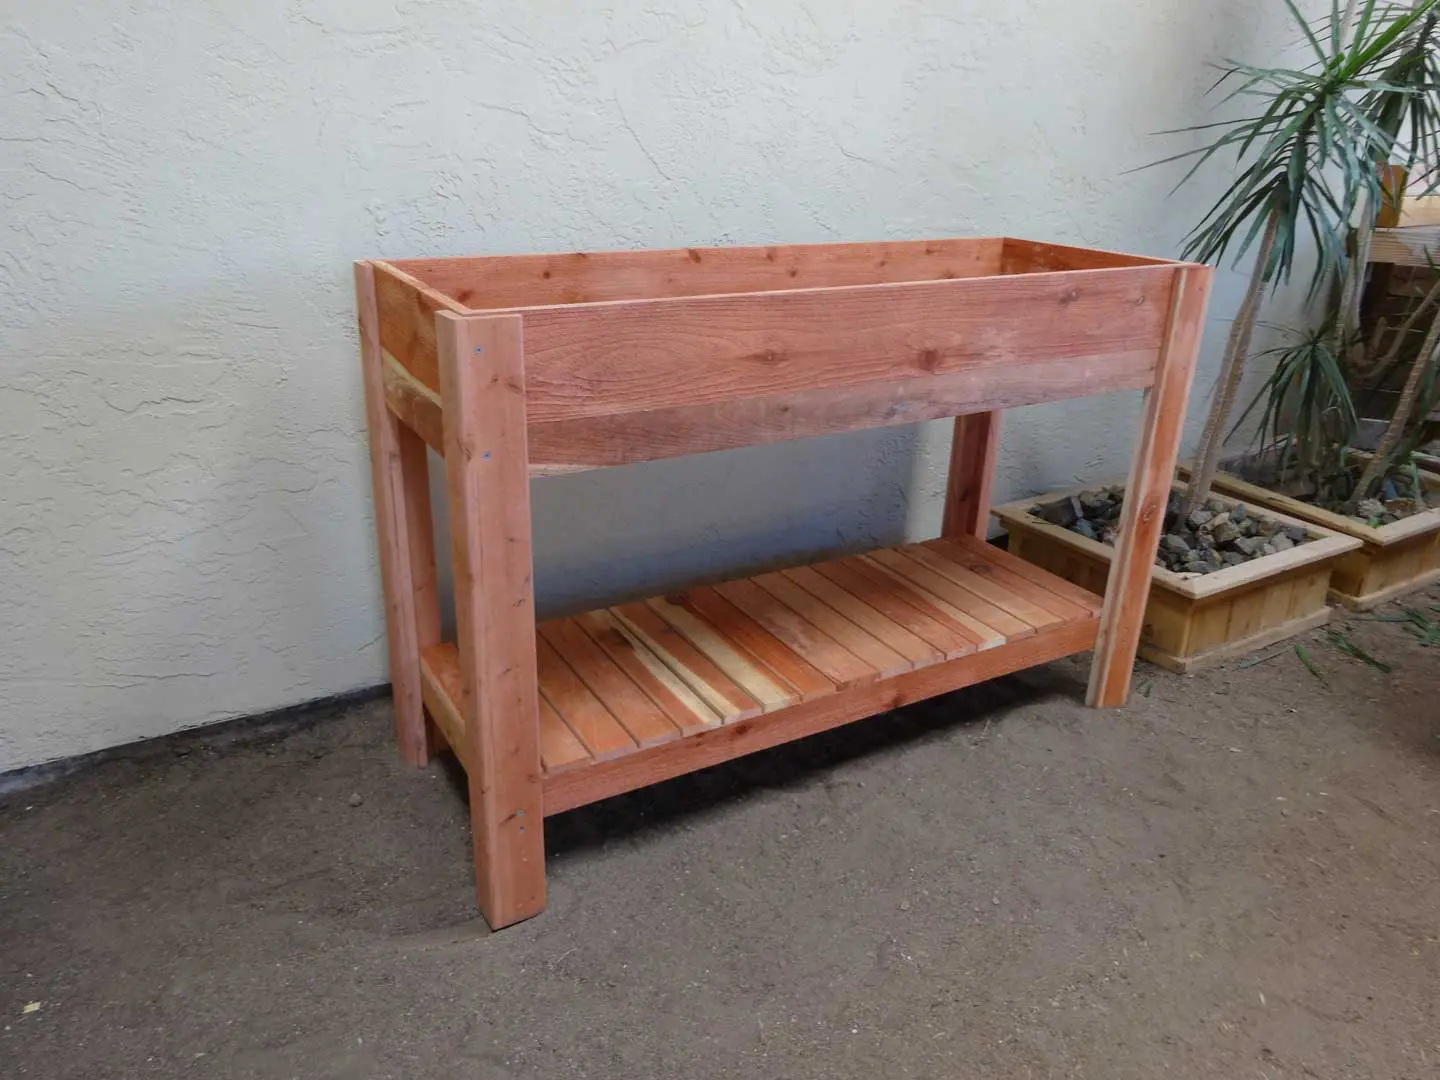 A wooden planter box with a shelf underneath it.